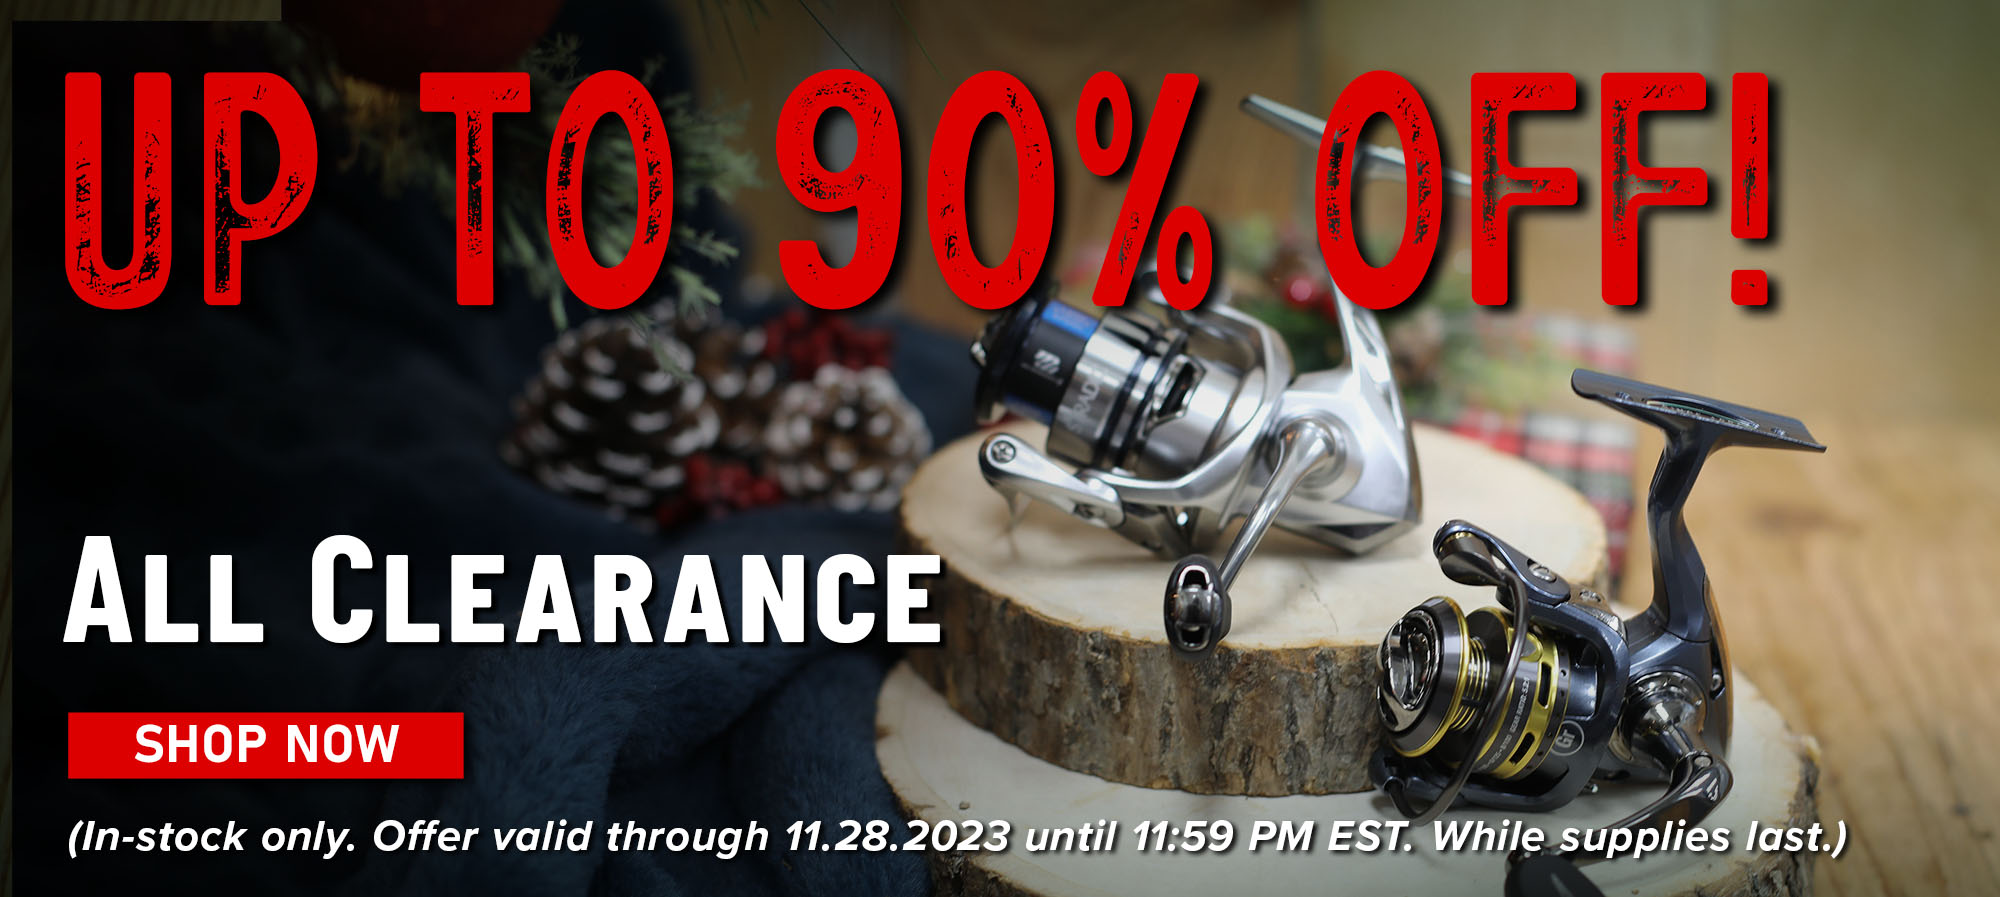 Up to 90% Off! All Clearance Shop Now (In-stock only. Offer valid through 11.28.2023 until 11:59 PM EST. While supplies last.)